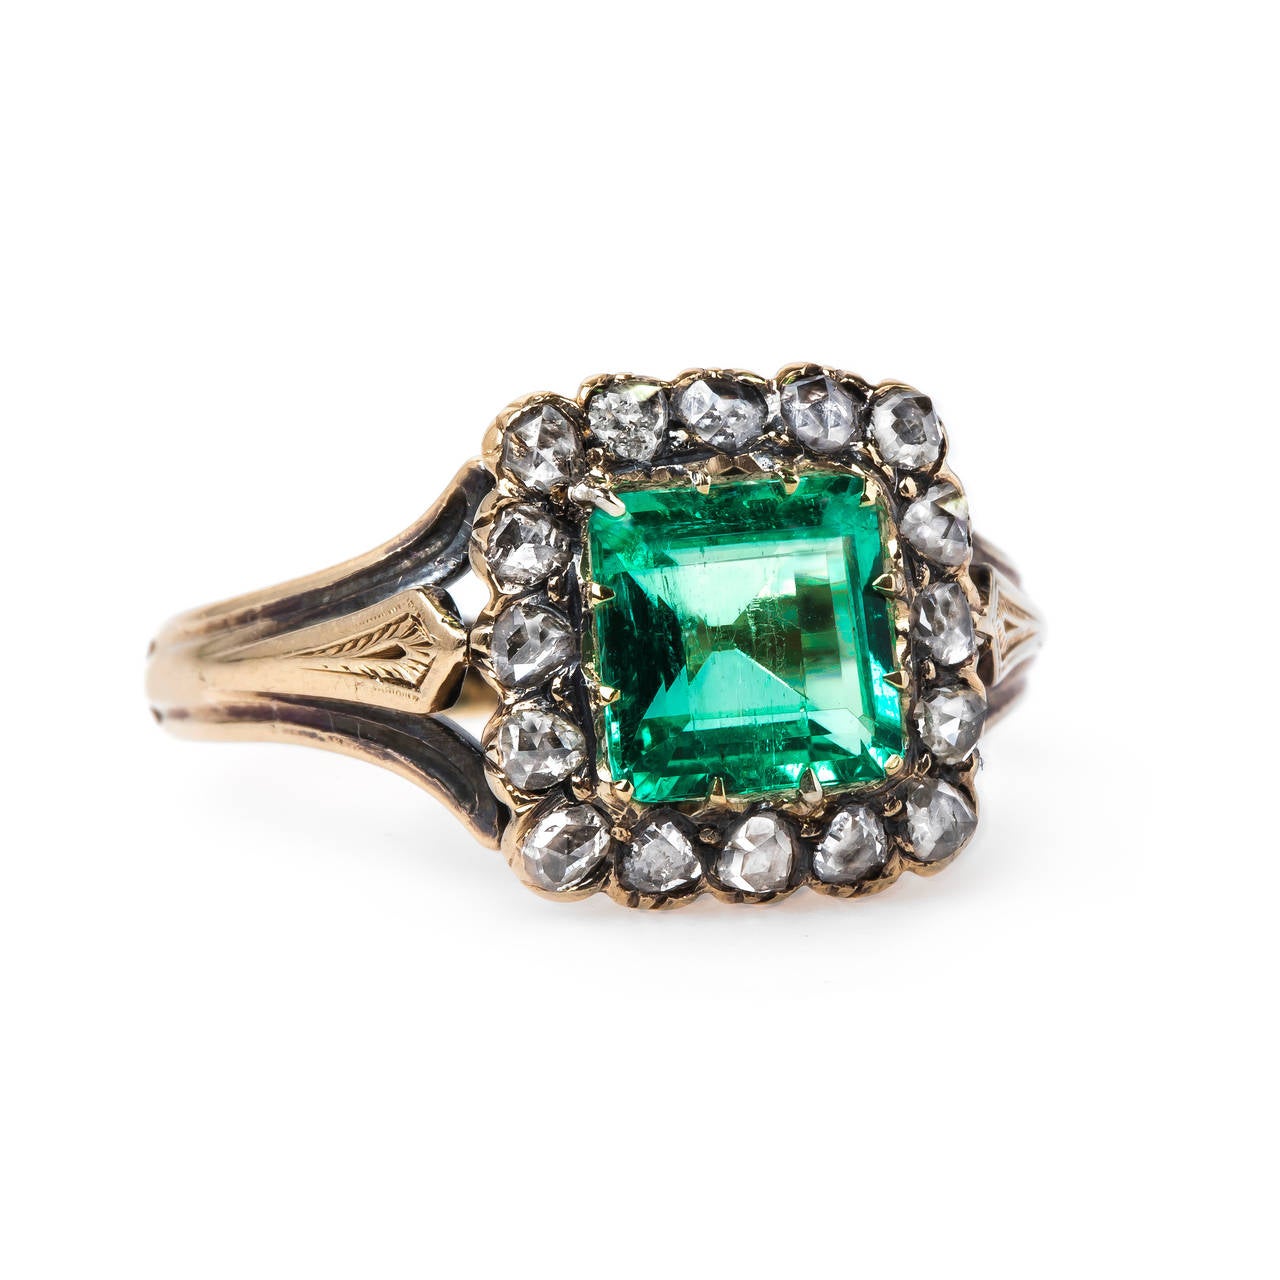 Greenwich is fabulous, one-of-a-kind Victorian era (circa 1895) 18k yellow gold ring featuring the extremely coveted French Hallmarks on the inside shank. Centering a 1.11ct Guild Laboratories certified Square Step-Cut Colombian emerald, the ring is